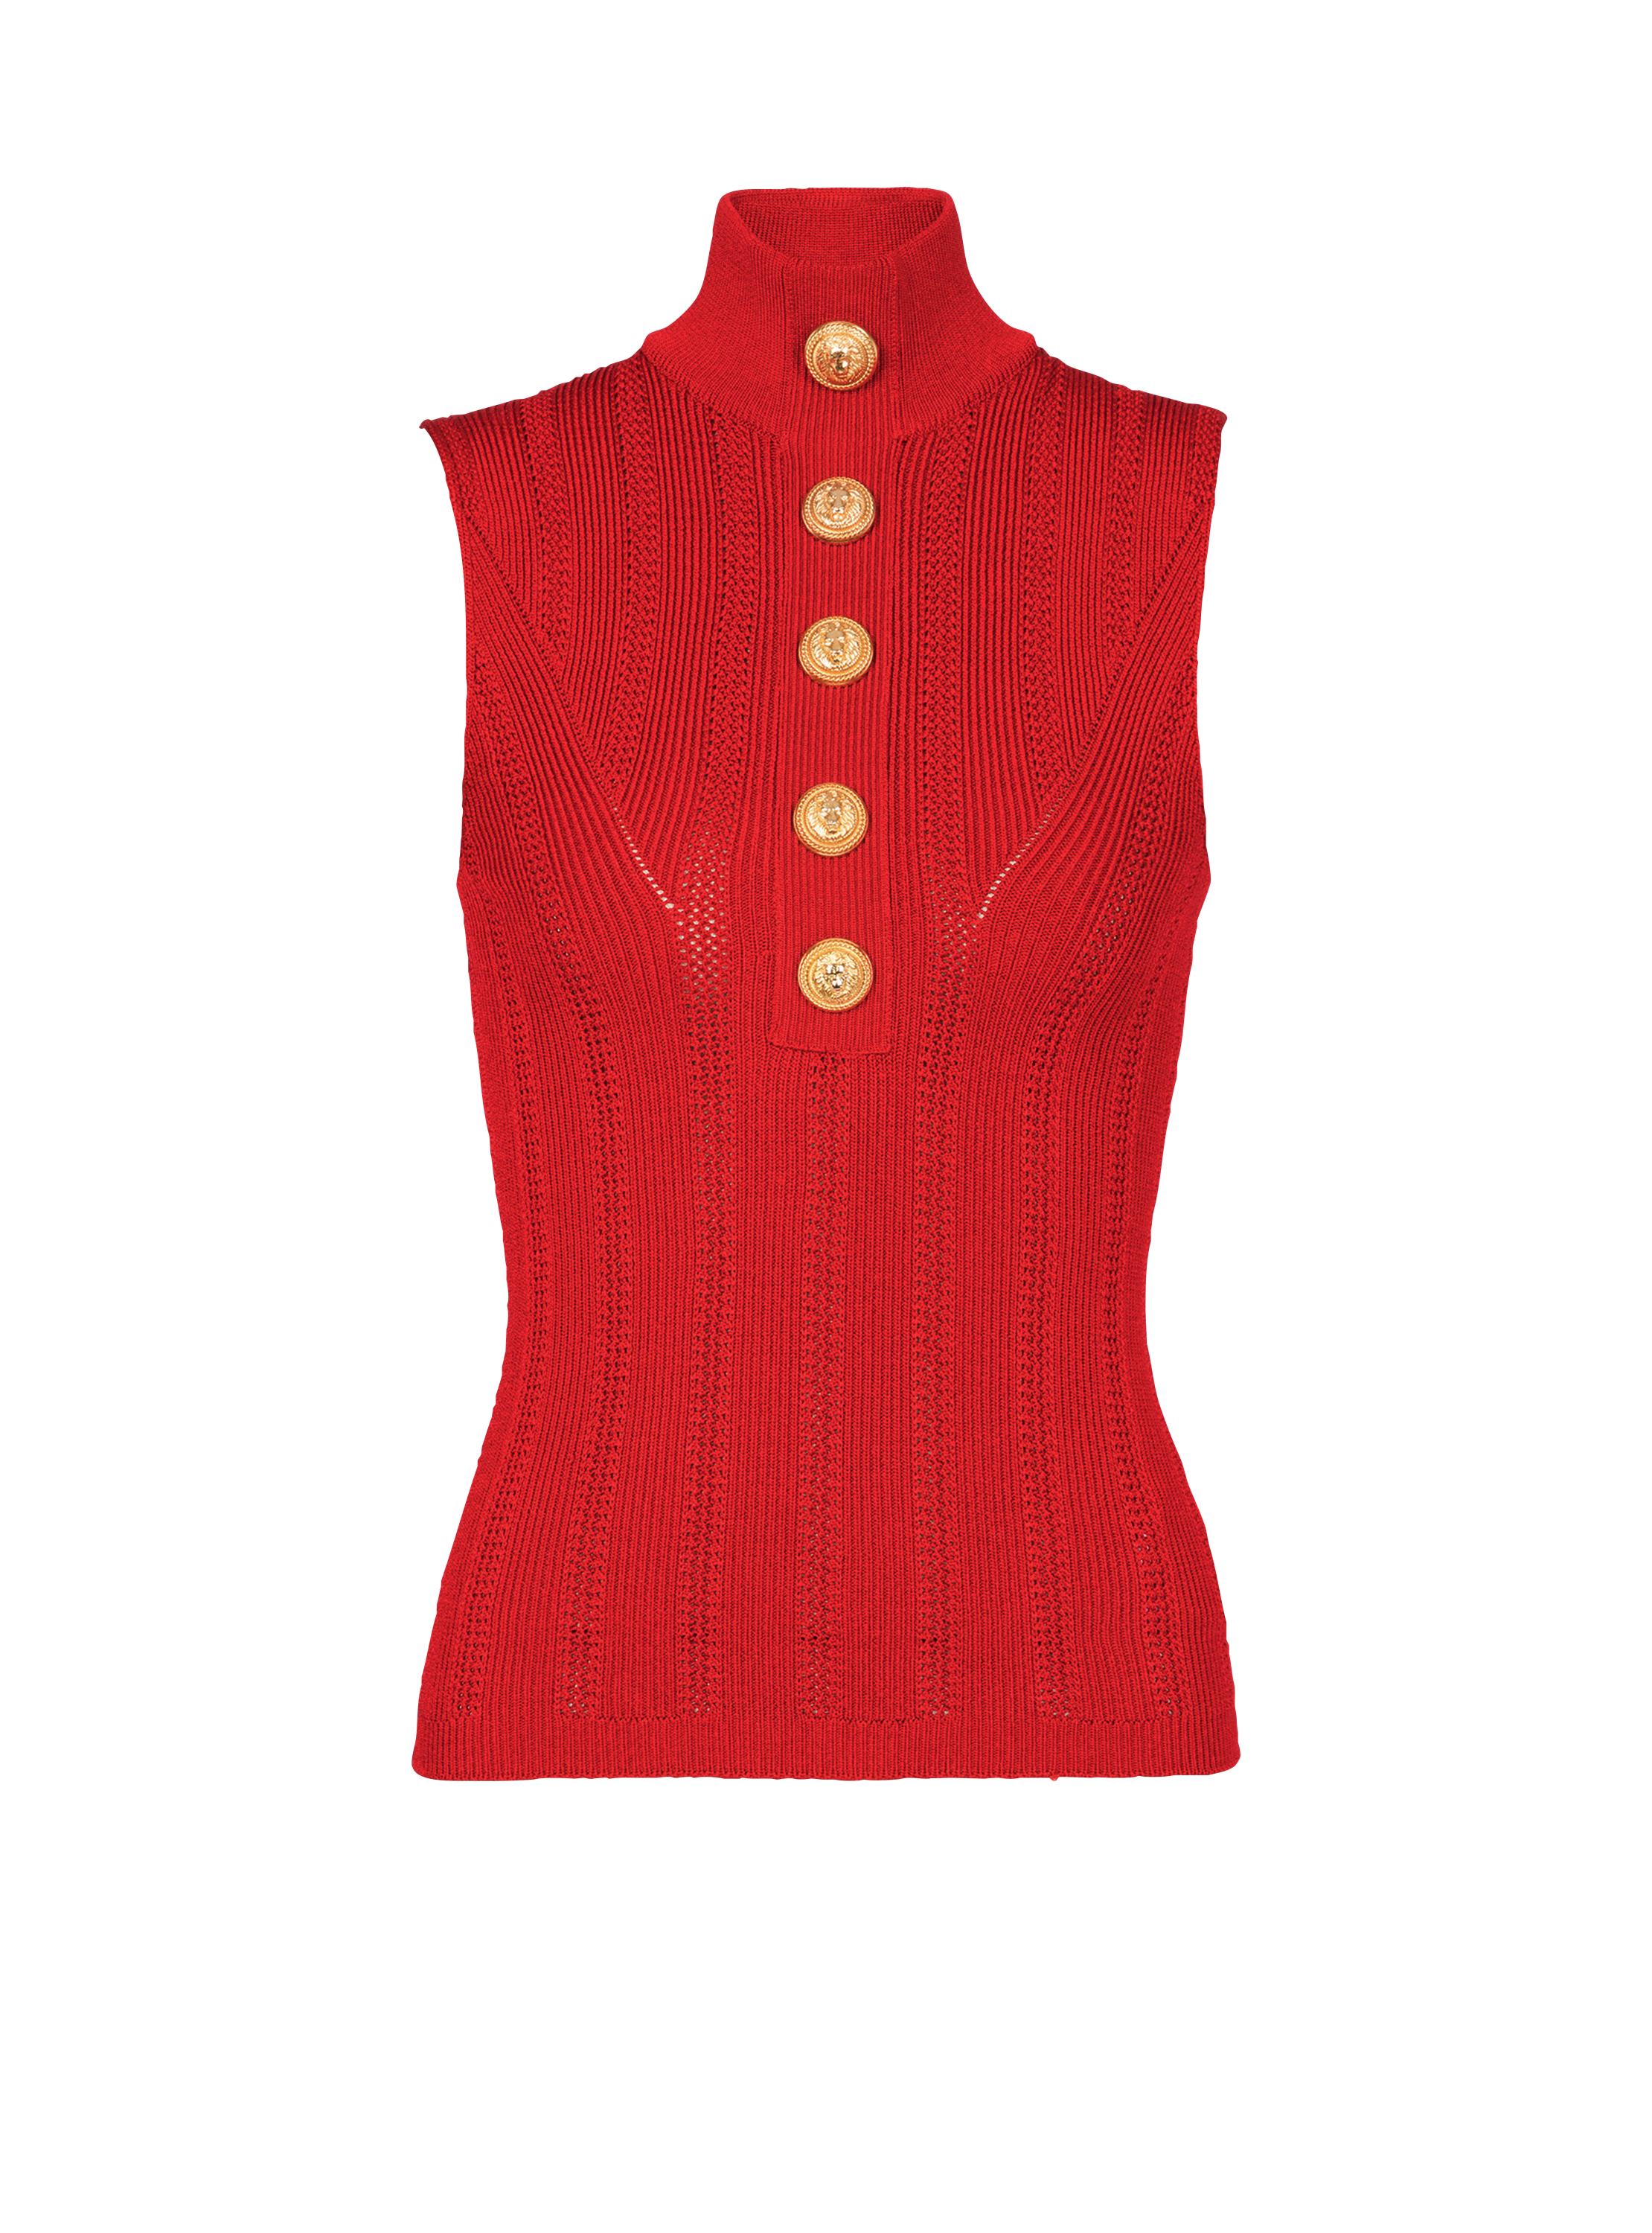 Sleeveless knit top, red, hi-res